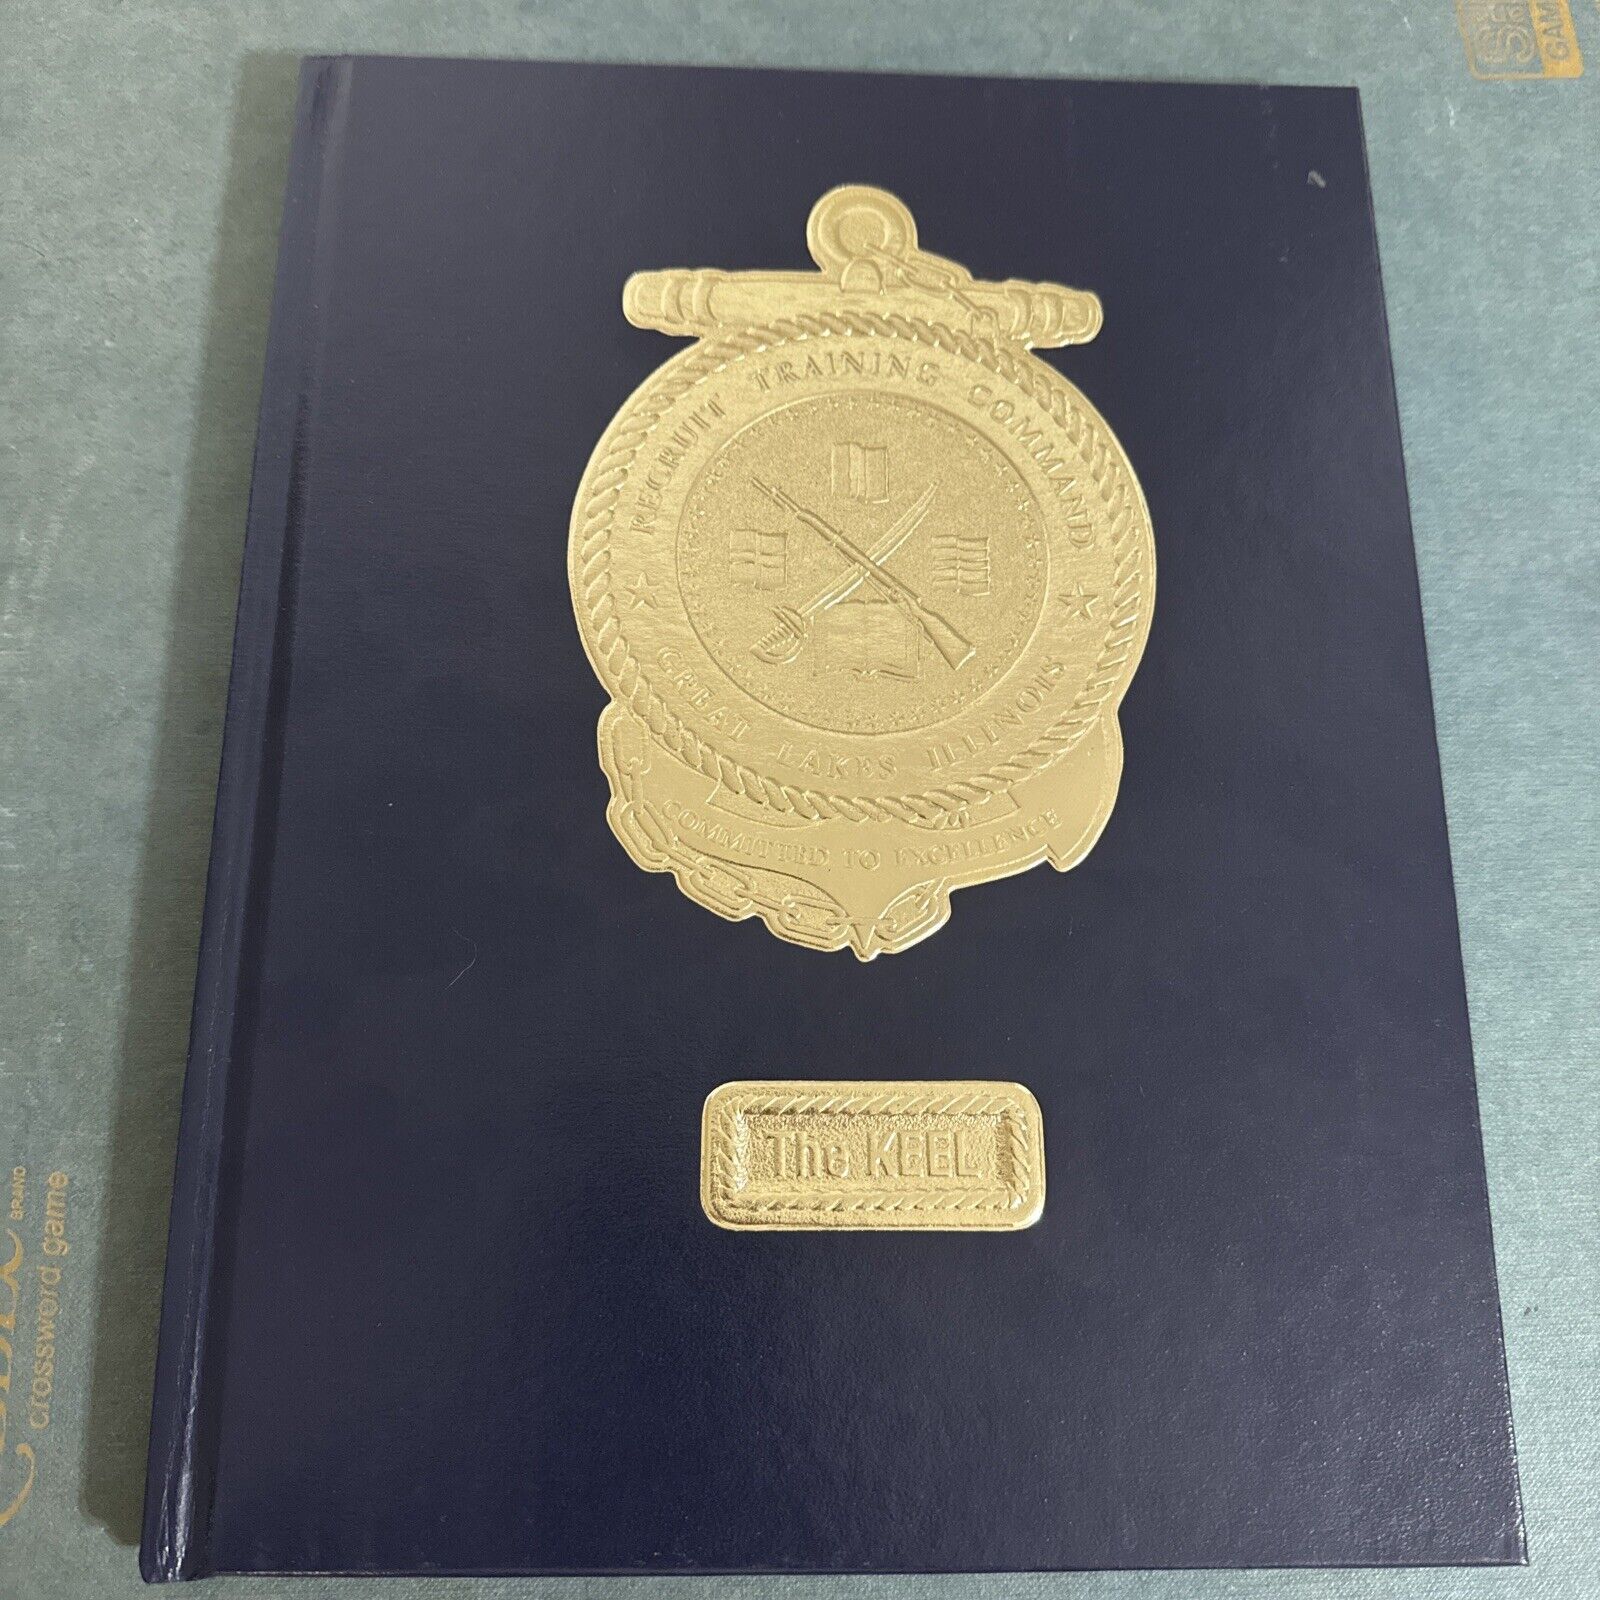 The Keel USN Great Lakes Illinois Recruit Training Command Book October 2015